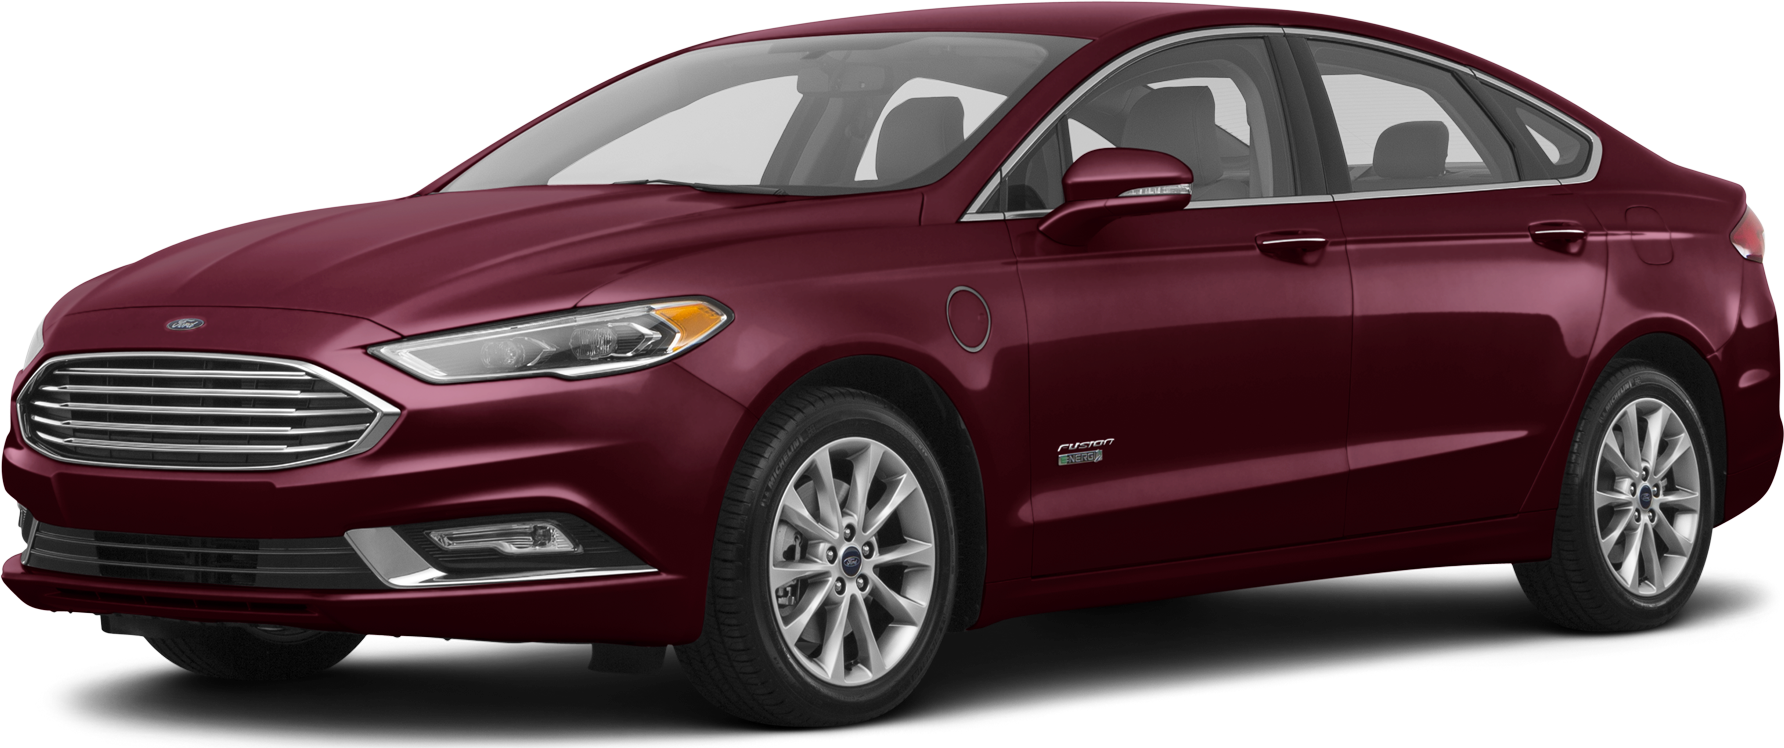 2017 Ford Fusion Energi Price, Value, Ratings & Reviews